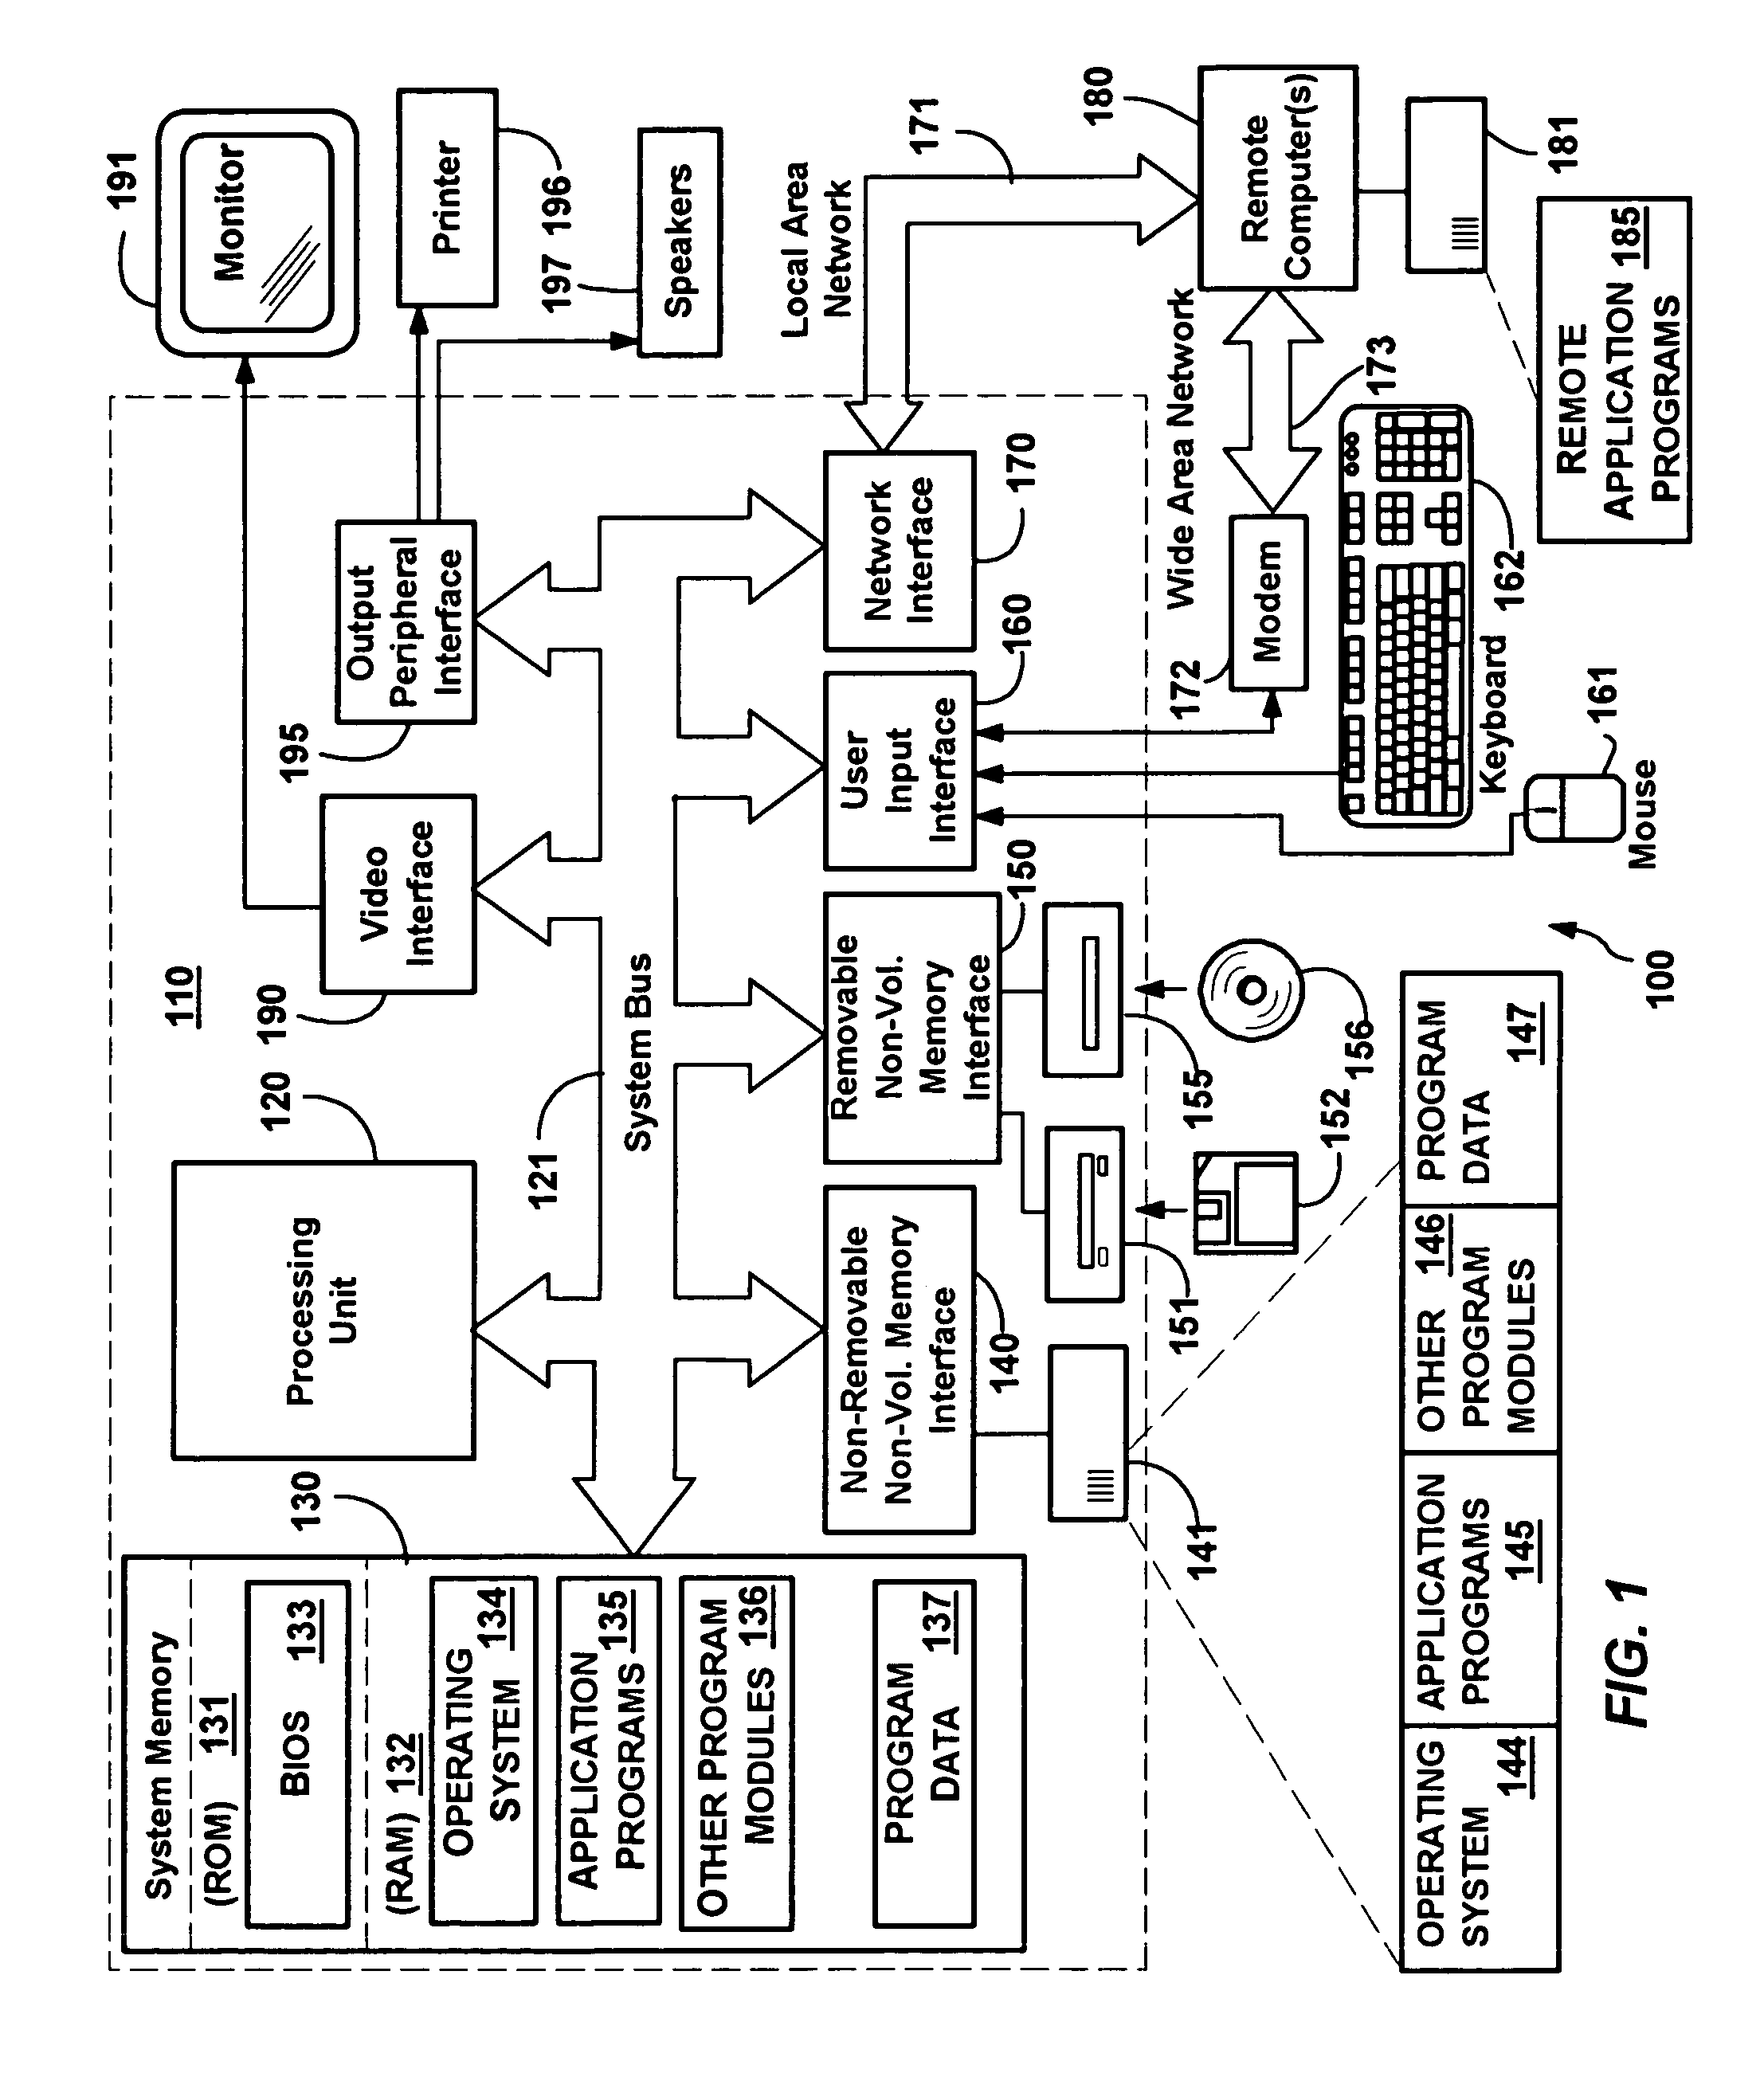 Isolating assembly versions for binding to application programs